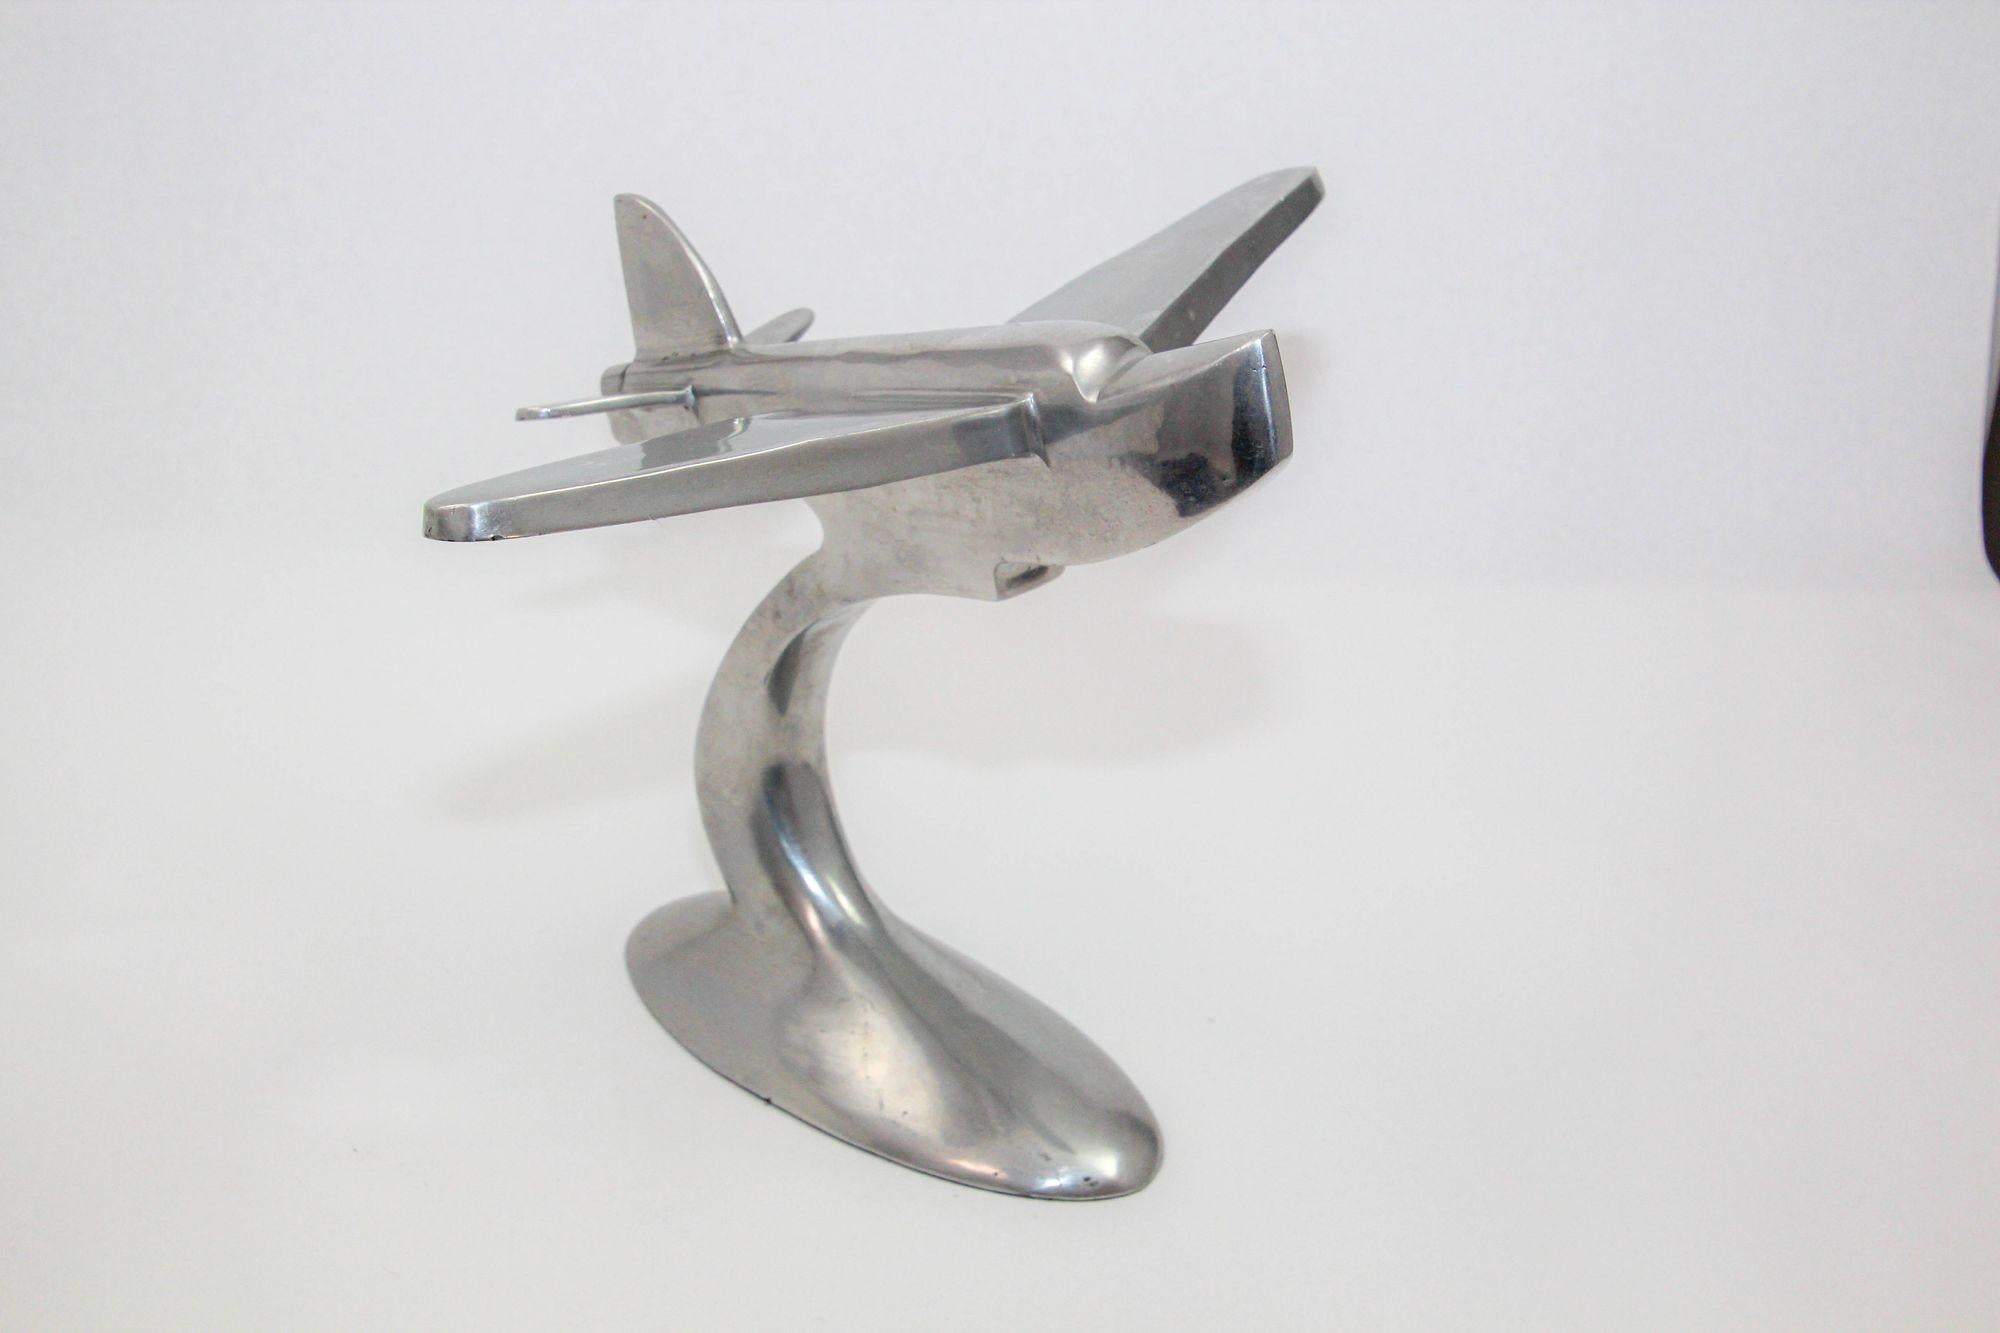 Art Deco Airplane Sculpture of the Boeing 314 Clipper Cast Aluminium.
Aluminum desk model inspired by the Art Deco era of the 1930s and 1940s, showcasing the iconic Boeing 312 Pan Am Flying Clipper Boat design.
This metal airplane reminds us of